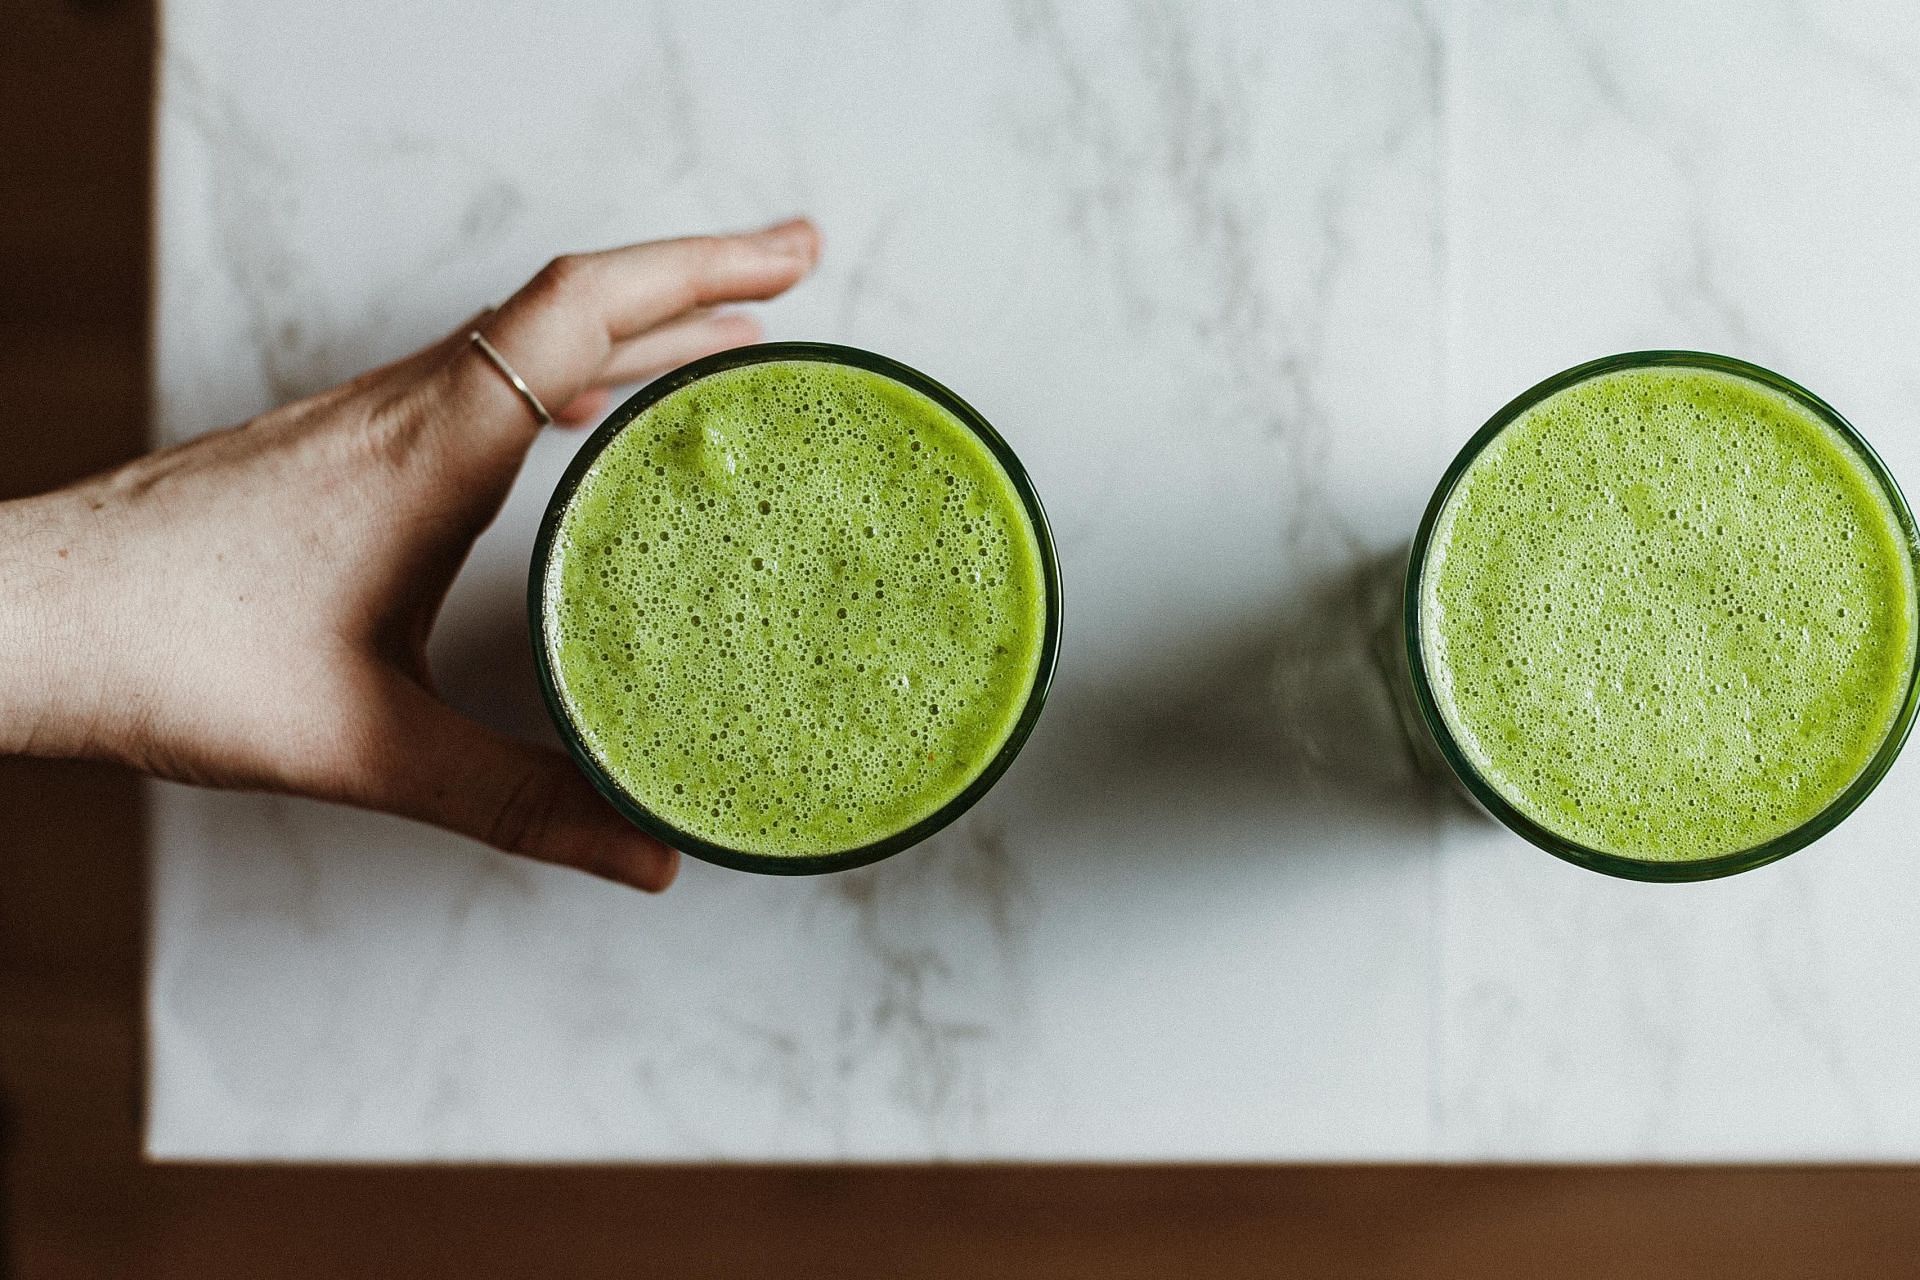 Matcha as one of the stress-relief teas (image sourced via Pexels / Photo by Lvrs)